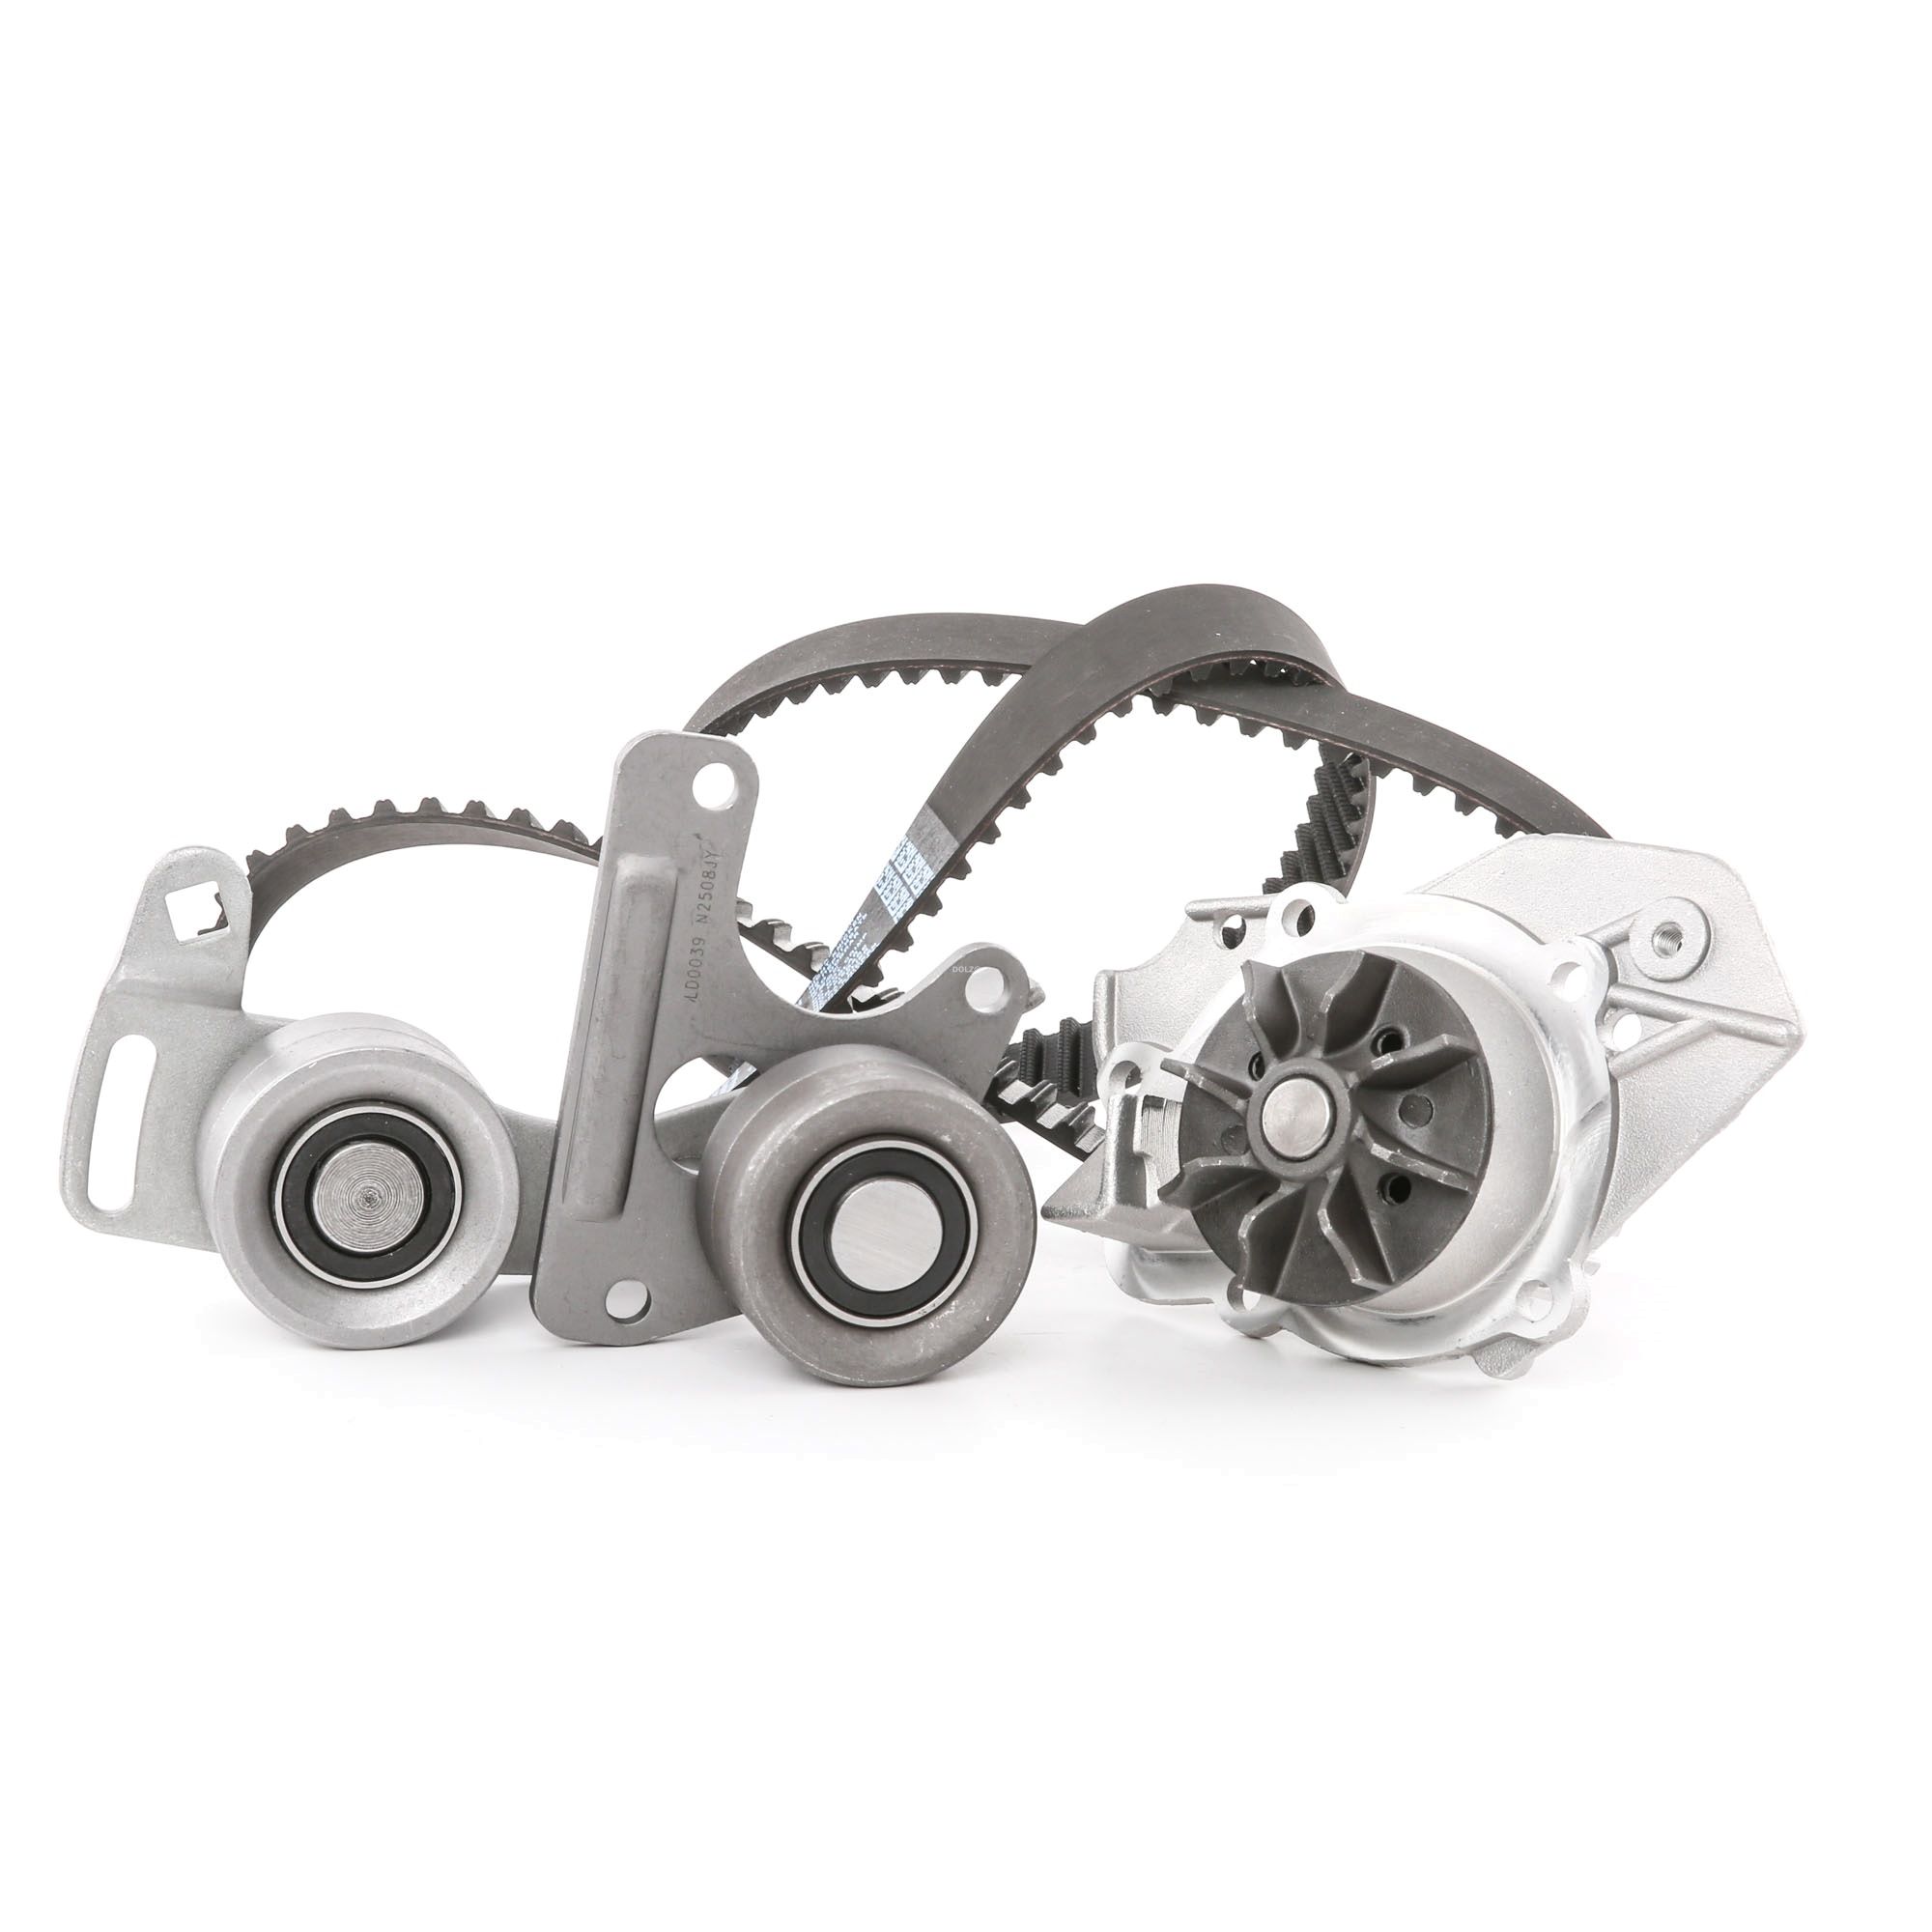 DOLZ KD011 Water pump and timing belt kit Number of Teeth: 136 L: 1295 mm, Width: 25,4 mm